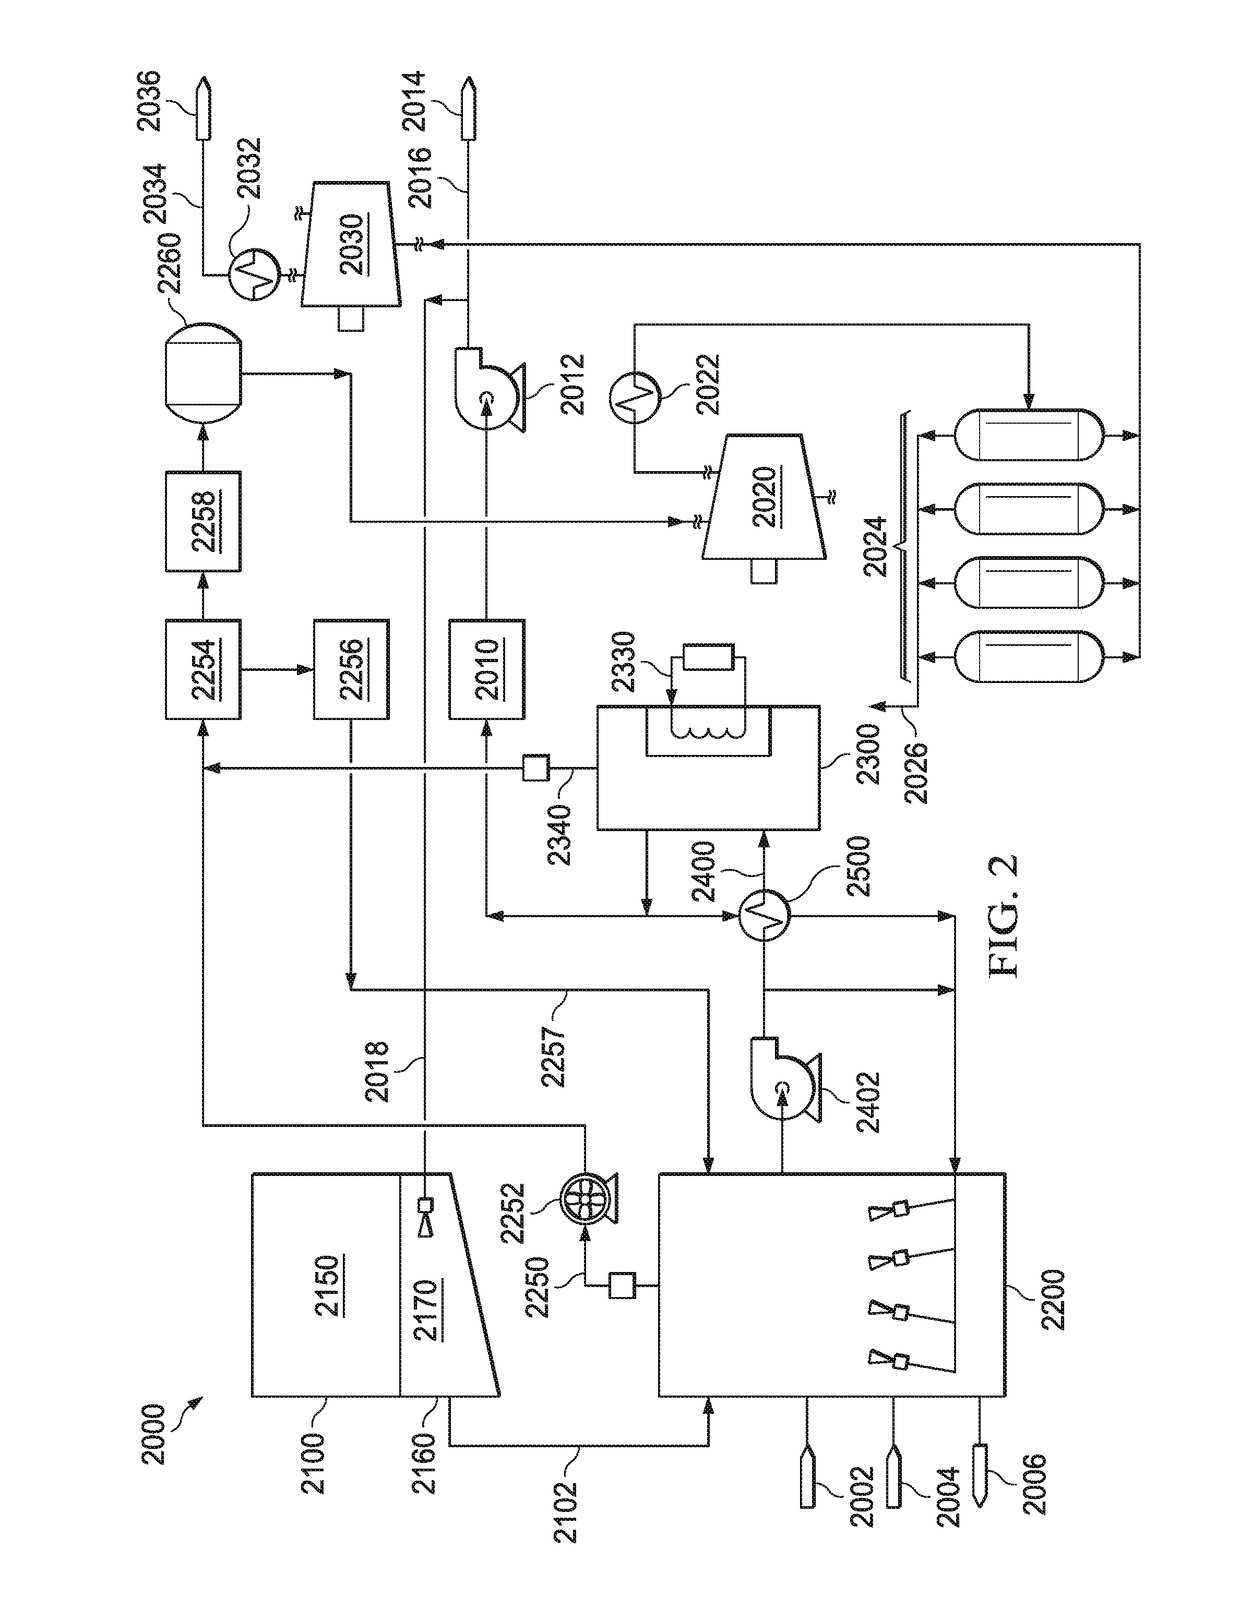 Systems and Methods for Processing Biogas